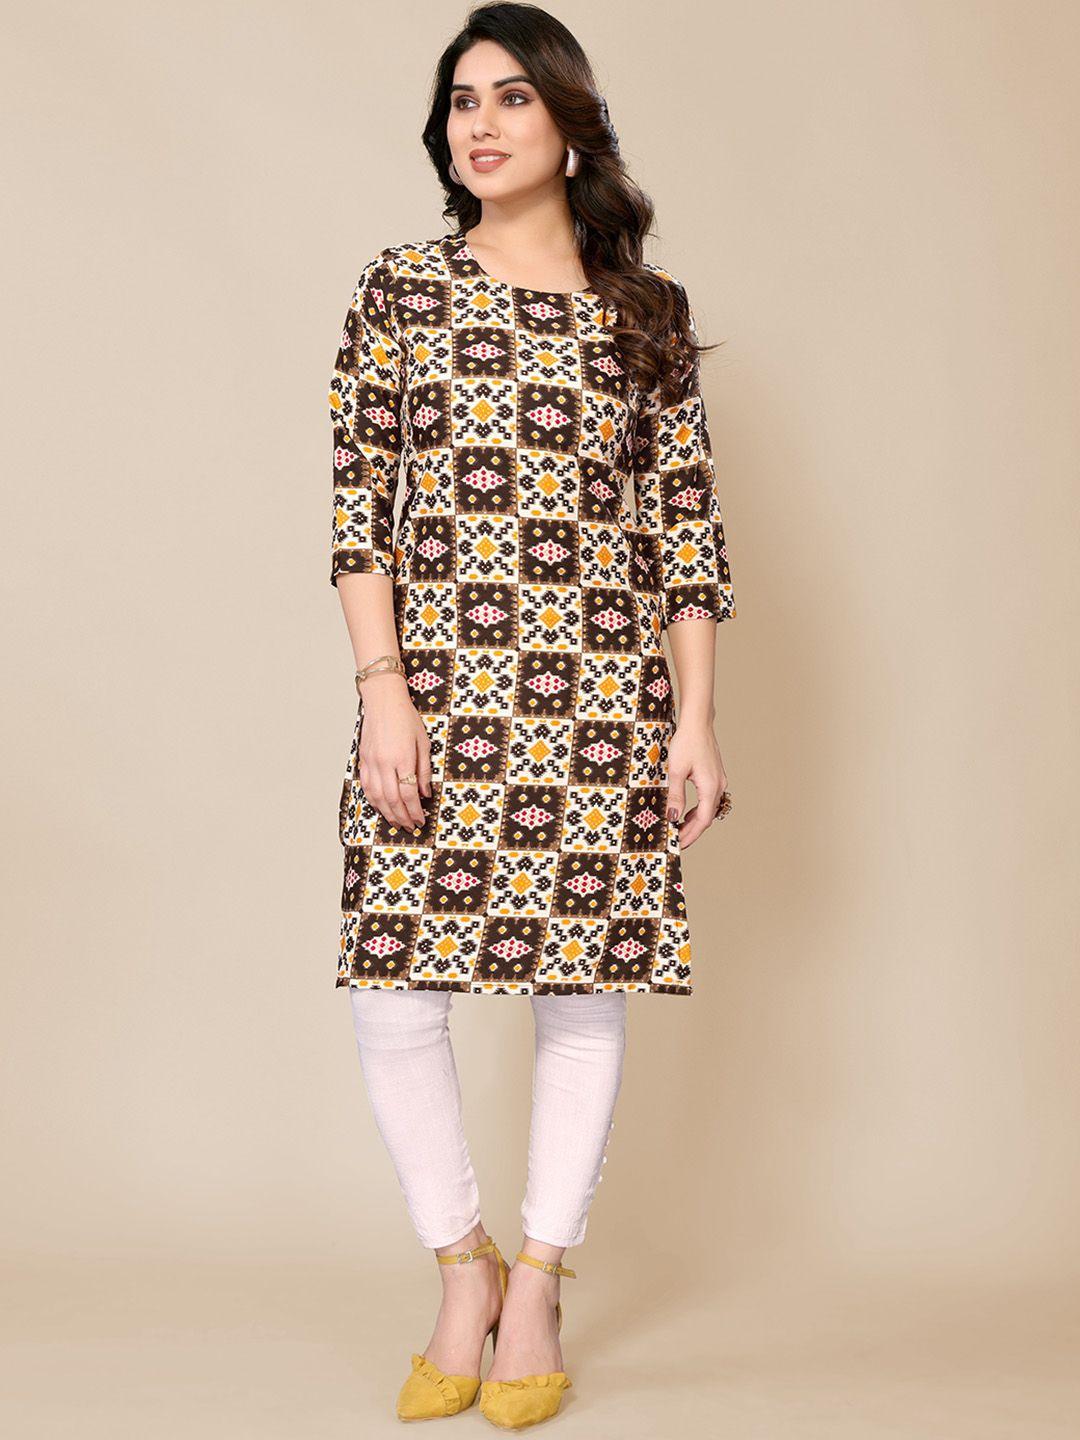 pyari - a style for every story women brown & yellow floral printed kurta